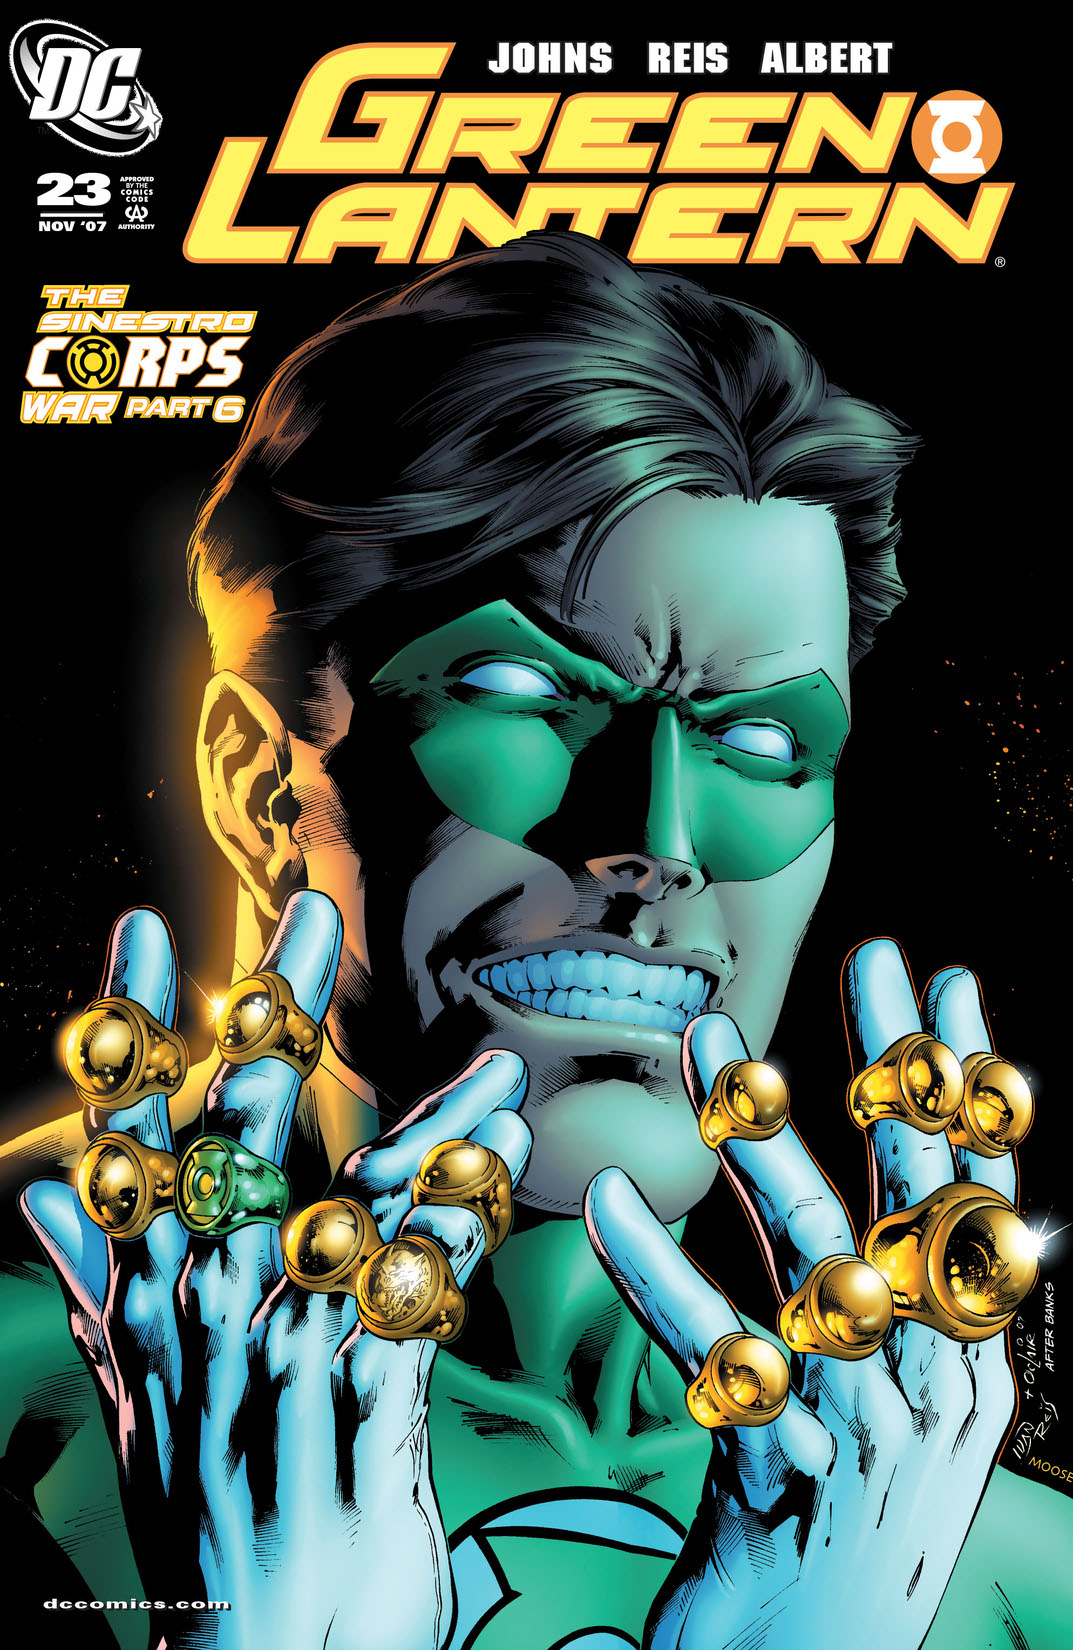 Green Lantern (2007-) #23 preview images